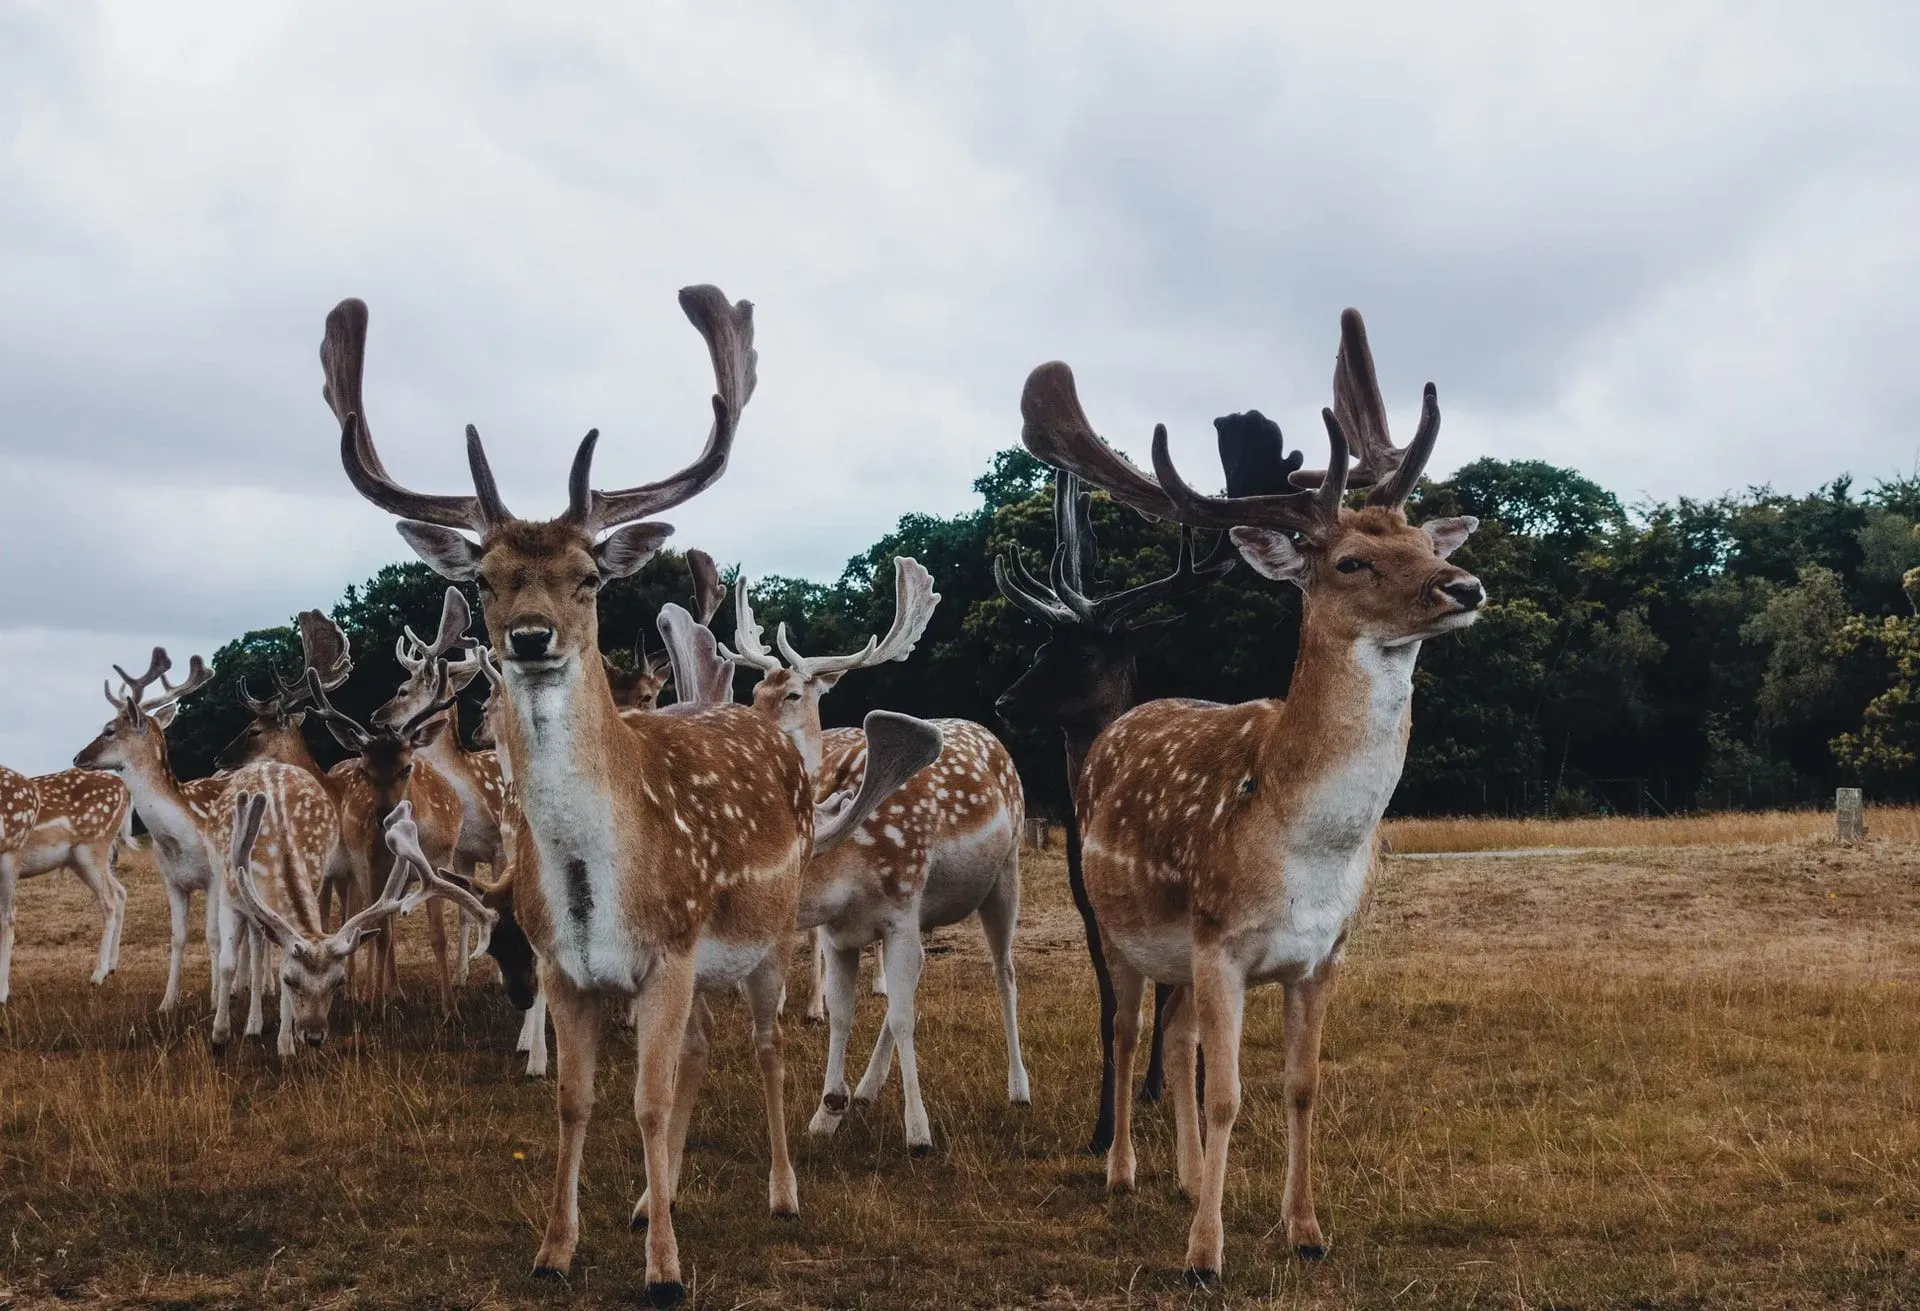 A herd of deer remains very protective of their fellow deer, especially if it's a fawn